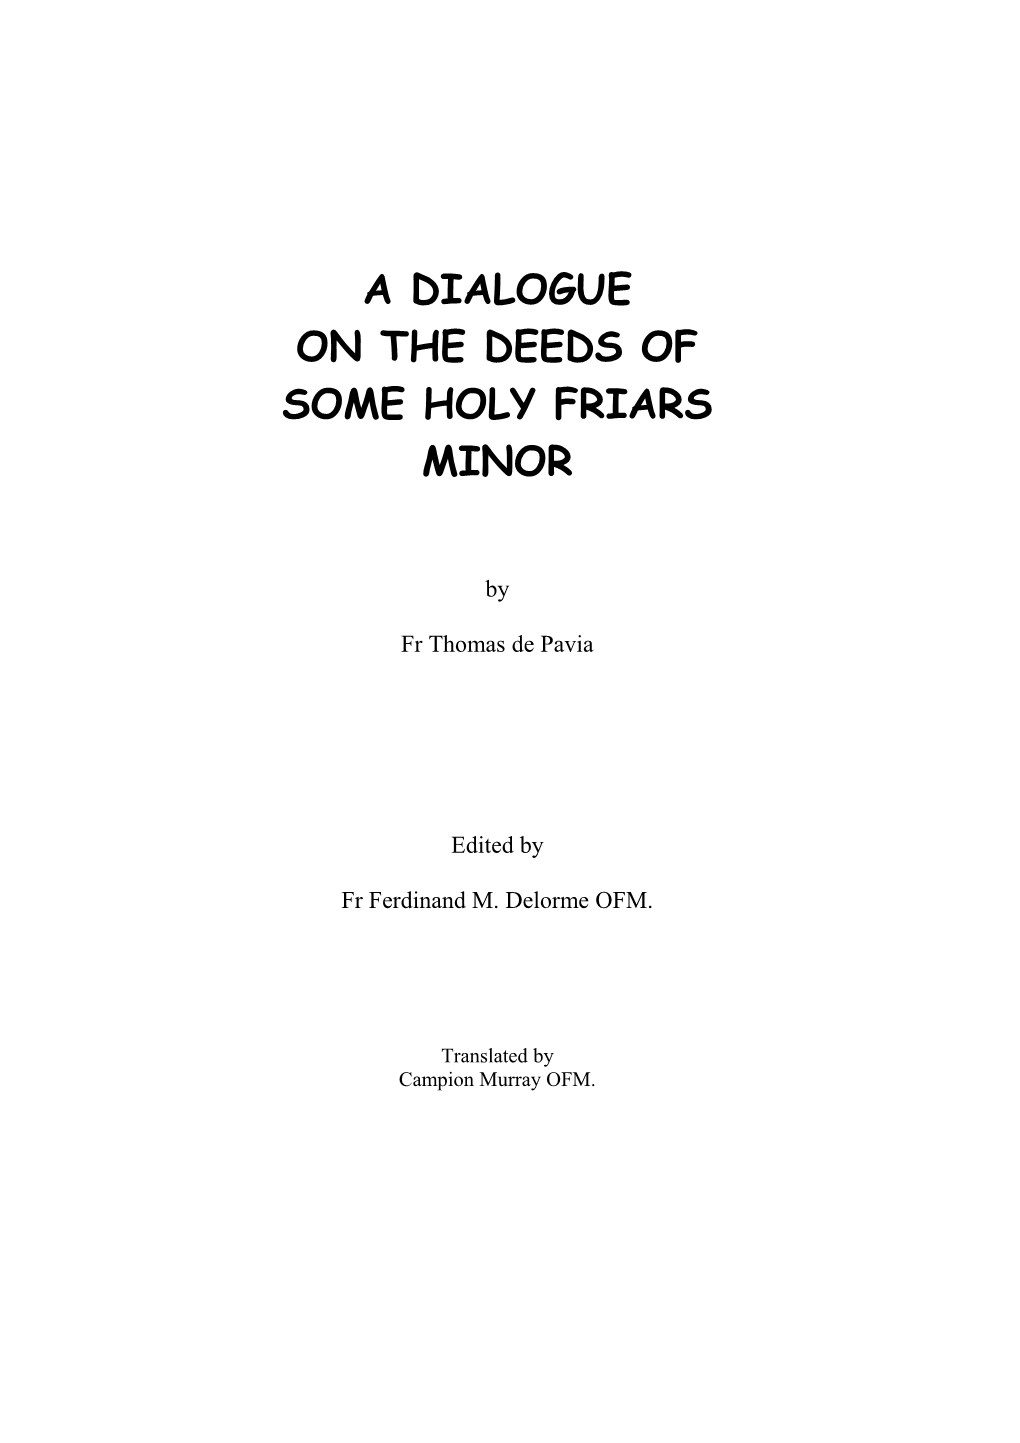 A Dialogue on the Deeds of Some Holy Friars Minor